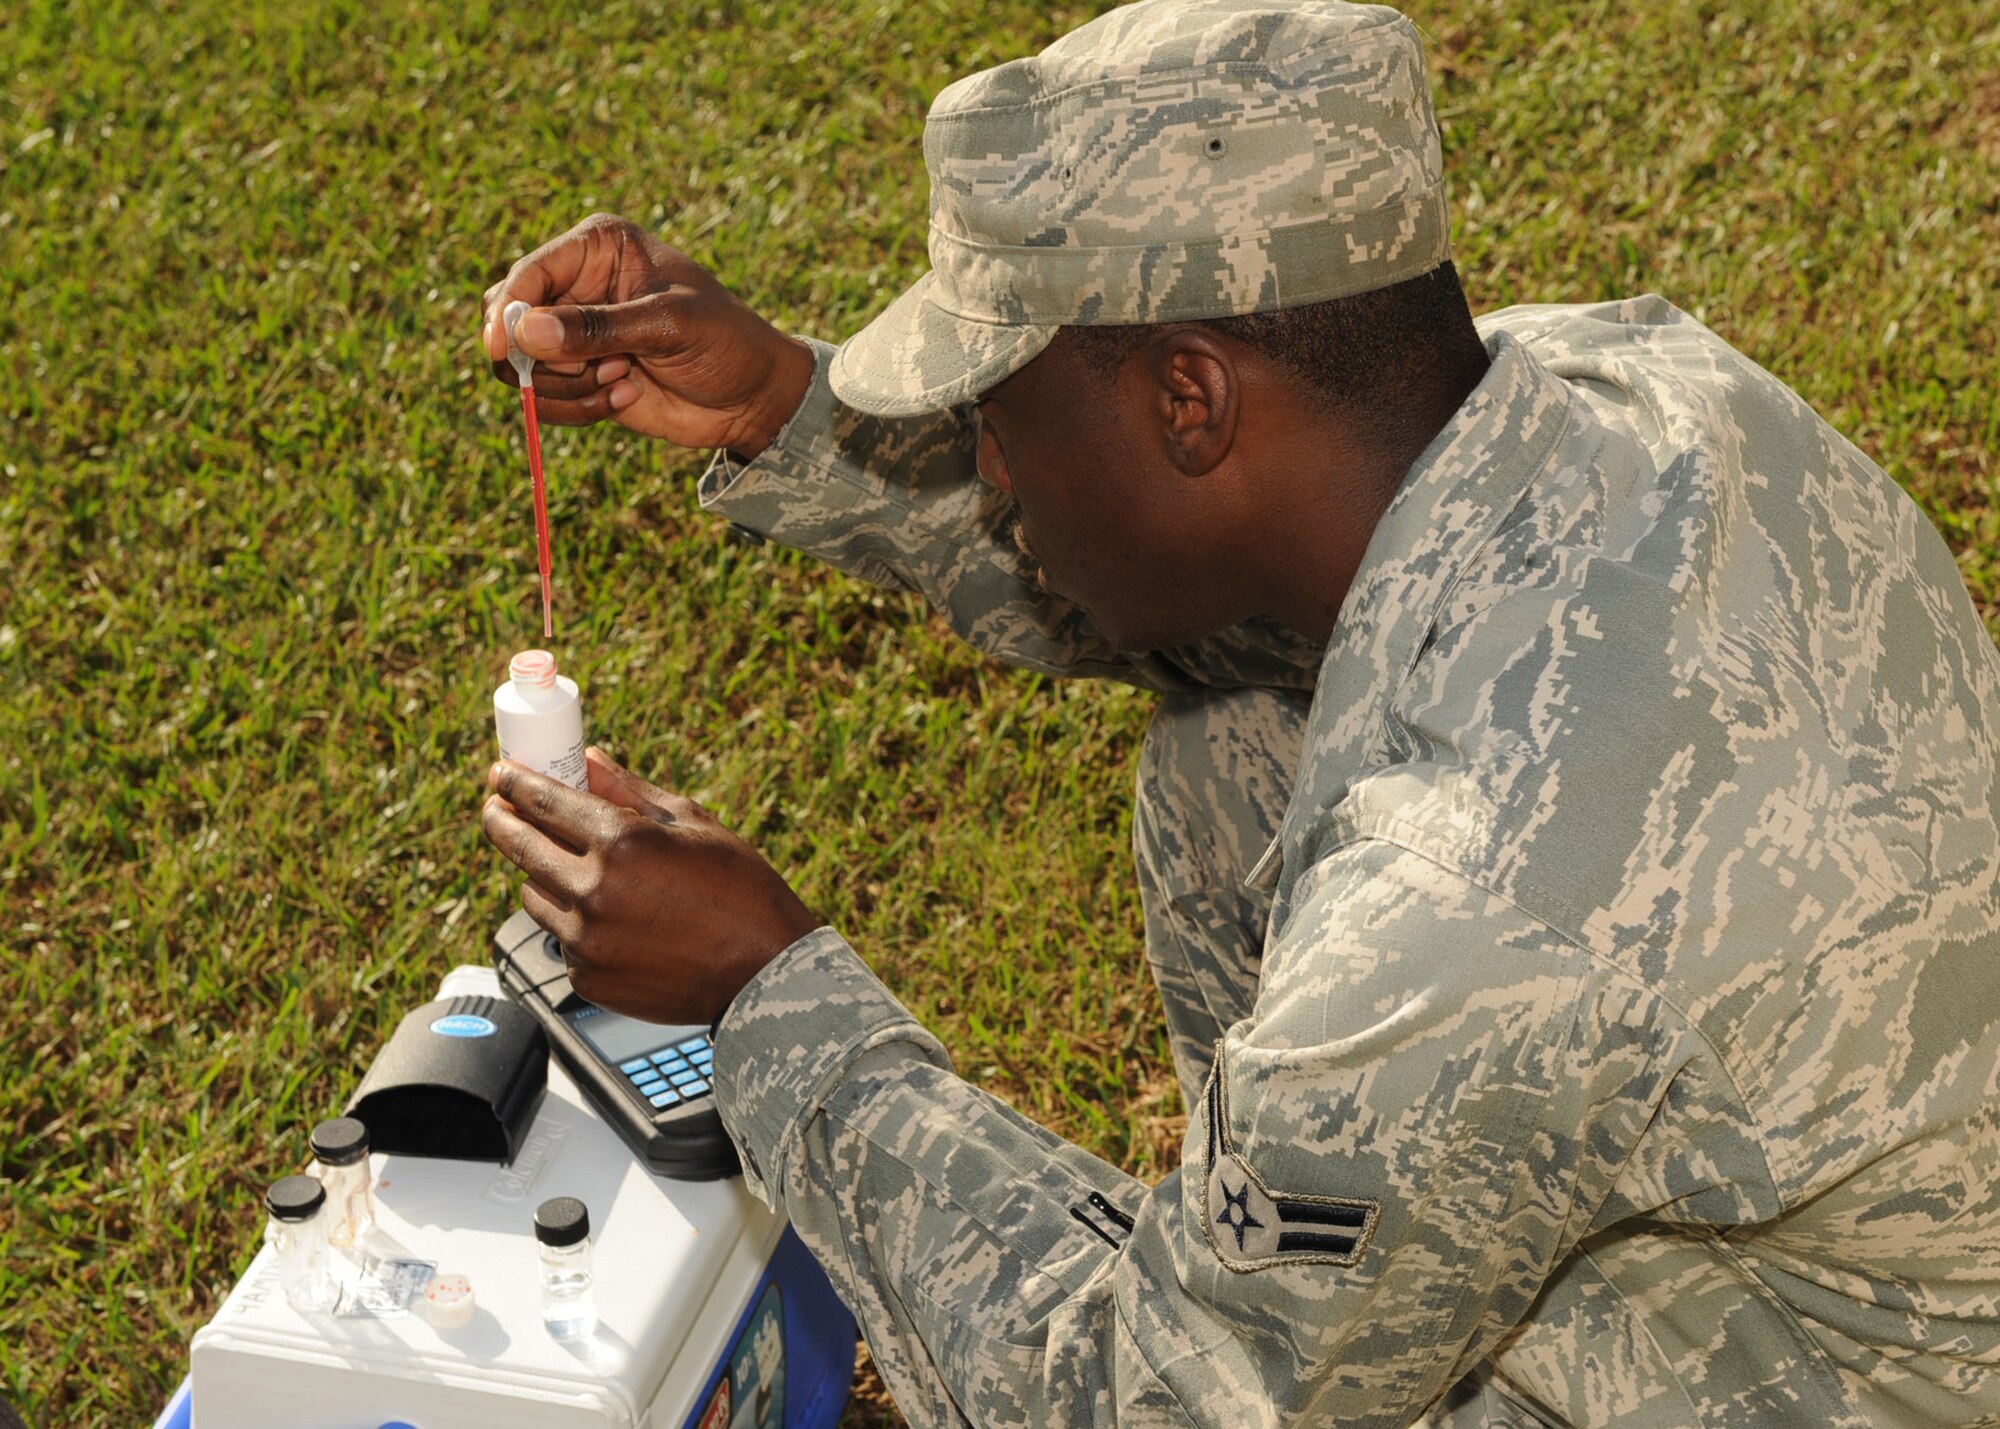 Airman 1st Class Harry Boykin, 4th Aeromedical Dental Squadron bioenvironmental technician, adds phenol red into a water sample on Seymour Johnson Air Force Base, N.C., Sept. 24, 2009. Phenol red is an agent used to detect pH levels in water and is frequently used in cell biology laboratories. (U.S. Air Force photo/Senior Airman Ciara Wymbs)